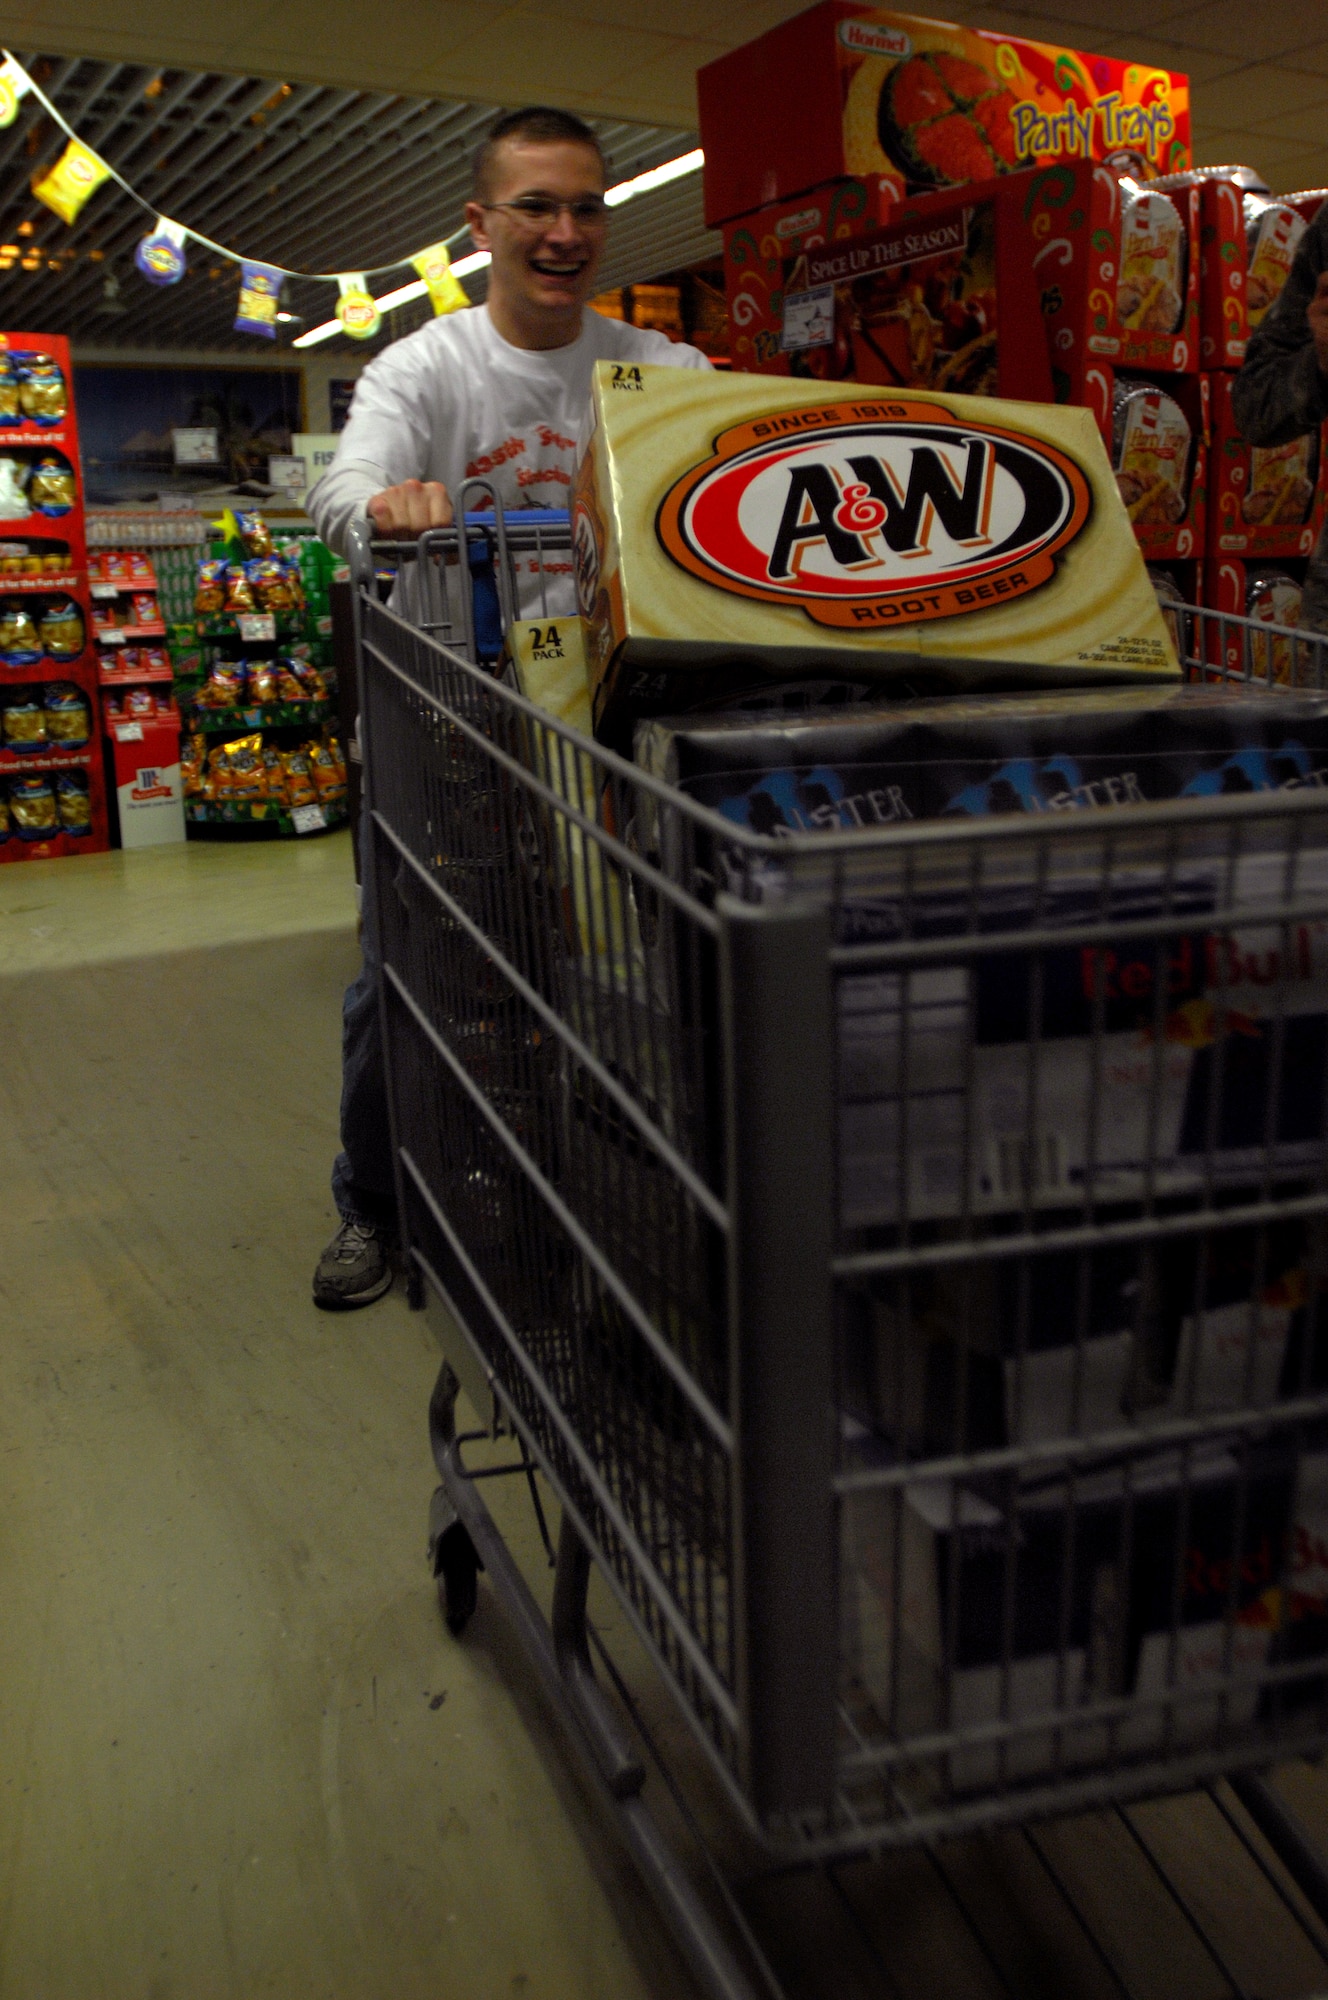 Airman 1st Class Alfred Hayes, 435th Munitions Squadron, races against the clock while collecting as much food and drinks as he can before time is up at the Ramstein Air Base Commissary, Dec. 18, 2008, Ramstein Air Base, Germany. A1C Hayes was participating in the 435th Services Squadron stocking stuffers event racking up over $881.00 of free groceries. (U.S. Air Force photo by Airman 1st Class Kenny Holston)